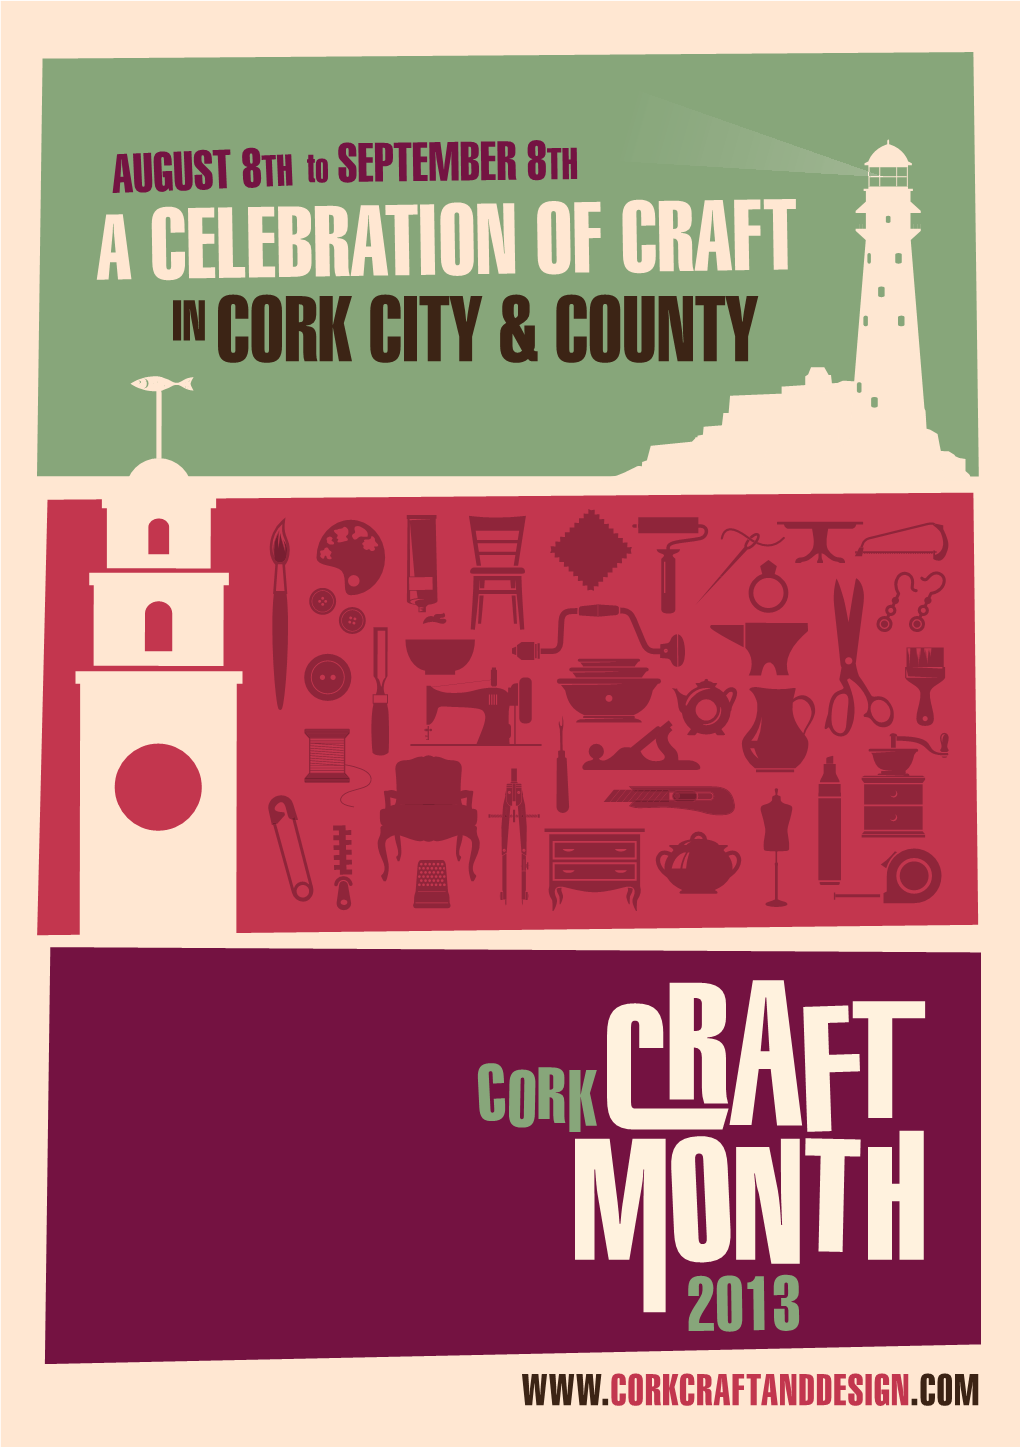 A Celebration of Craft in Cork City & County